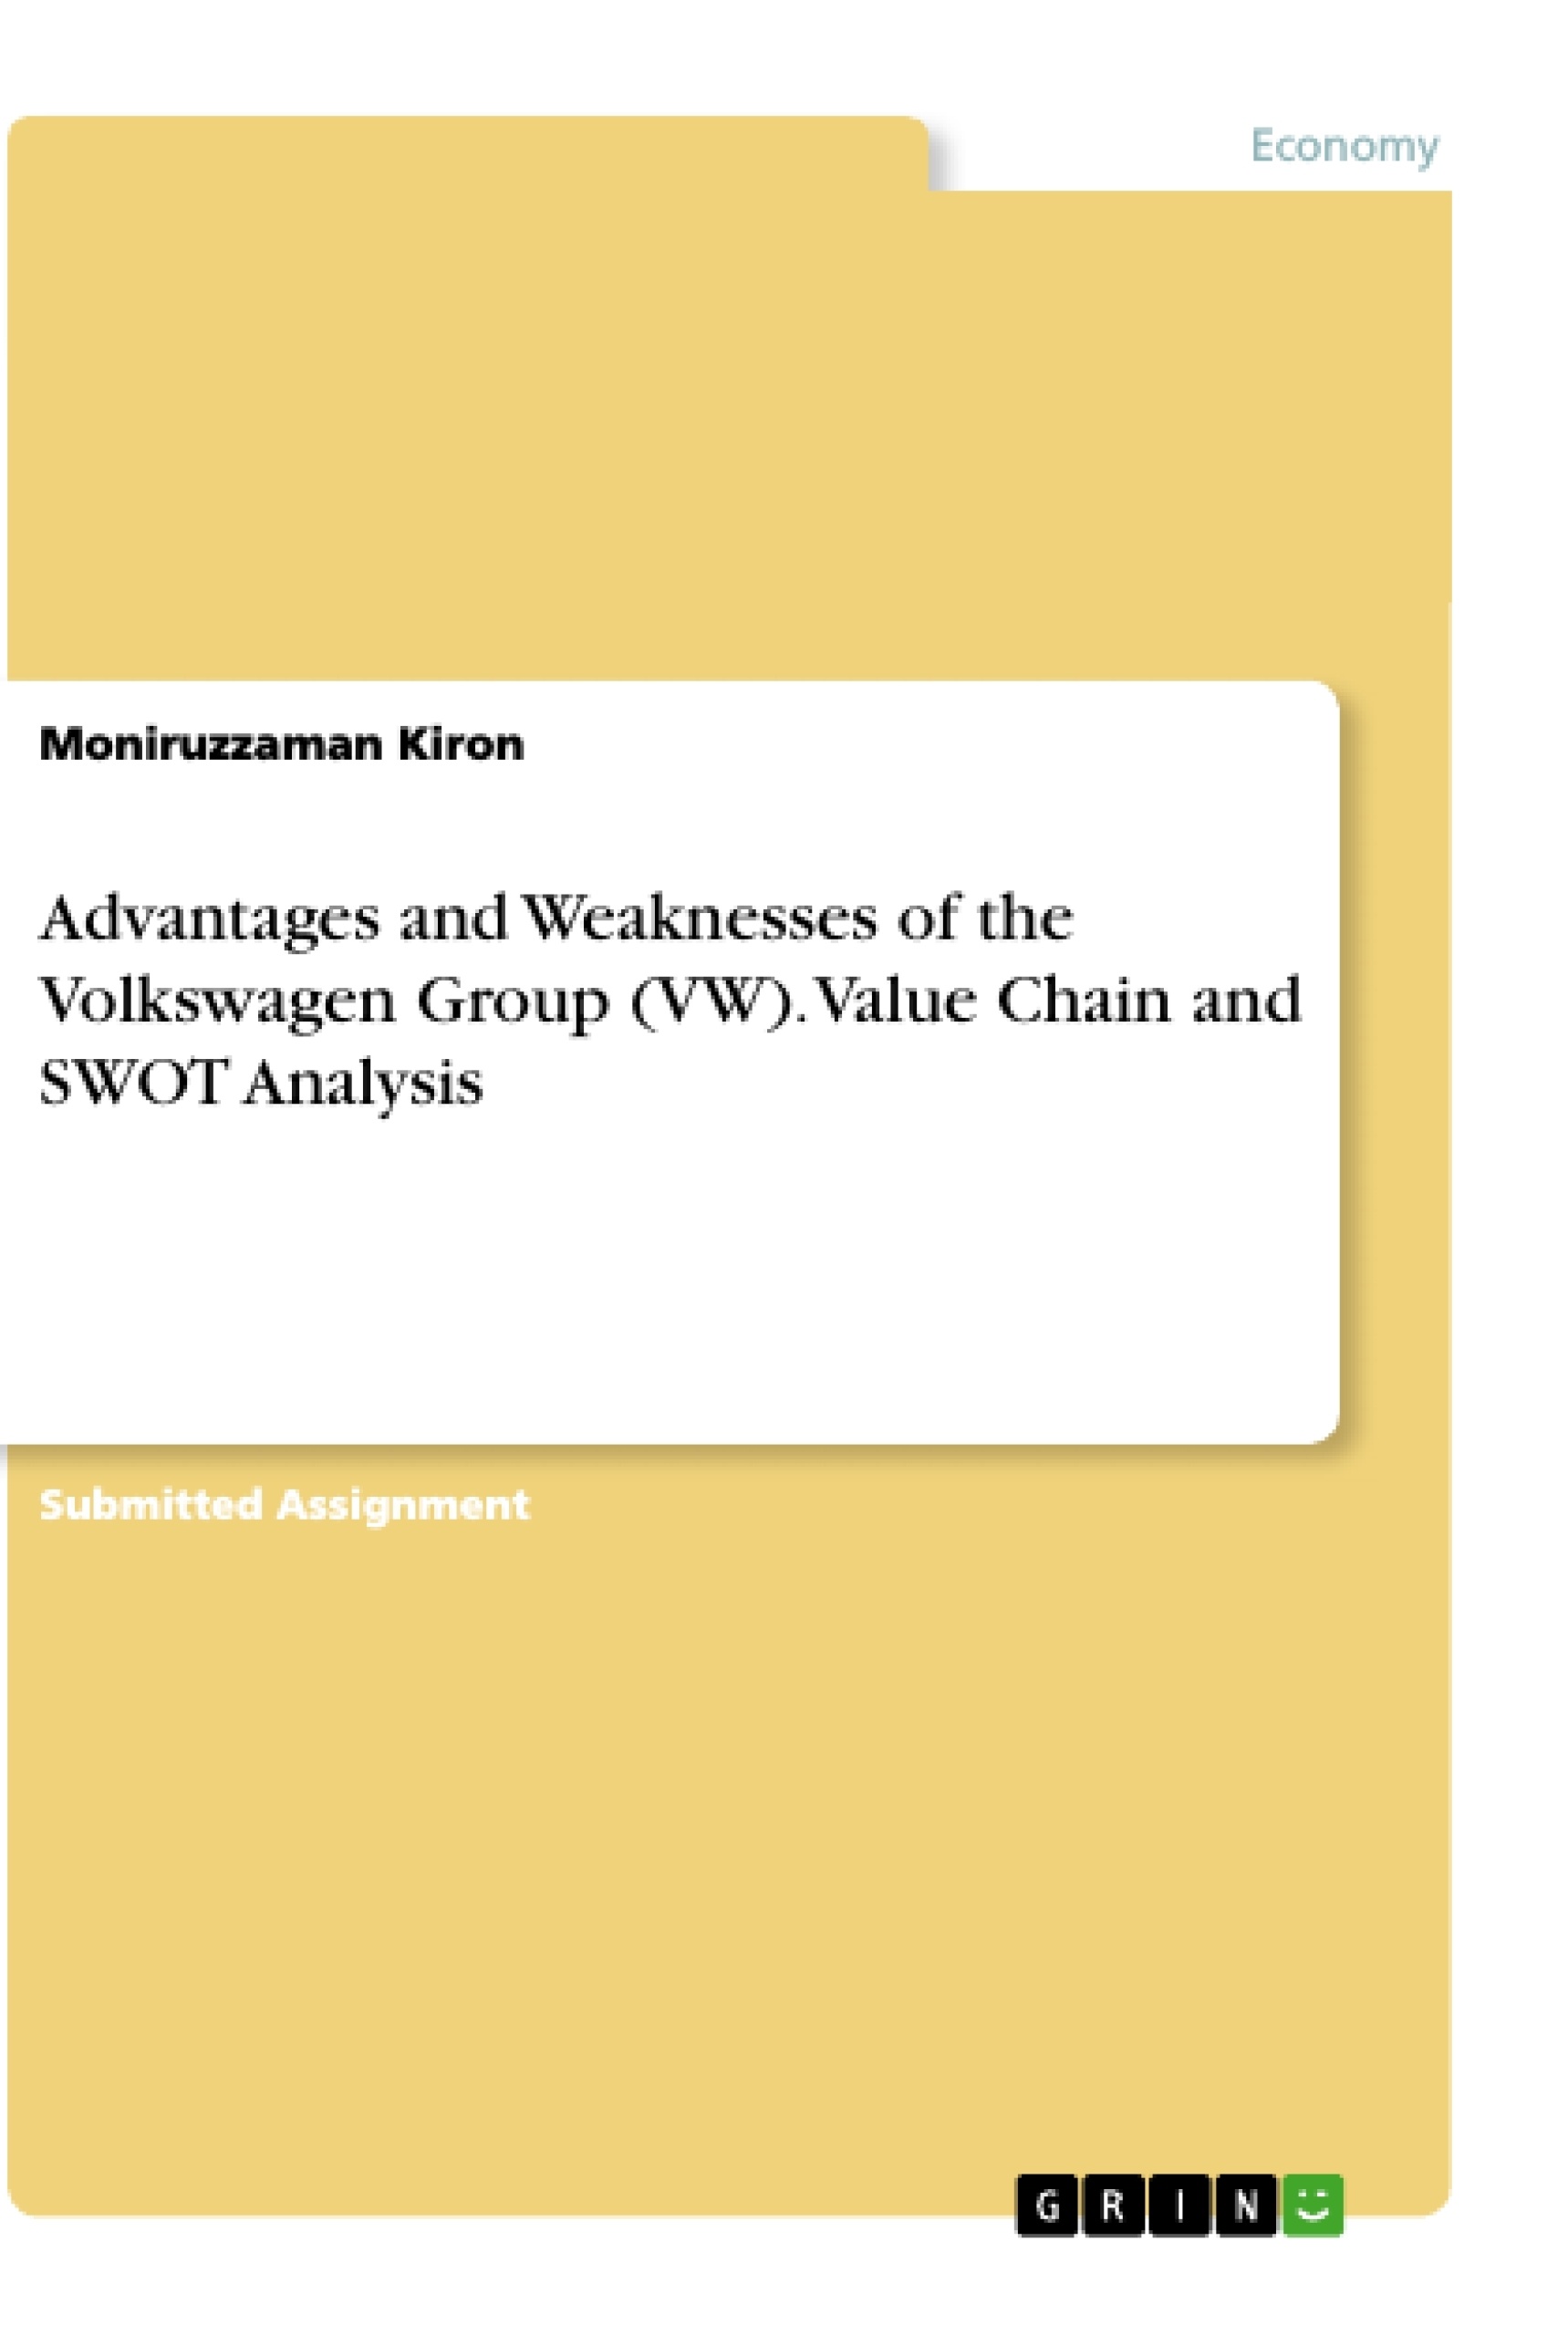 Title: Advantages and Weaknesses of the Volkswagen Group (VW). Value Chain and SWOT Analysis